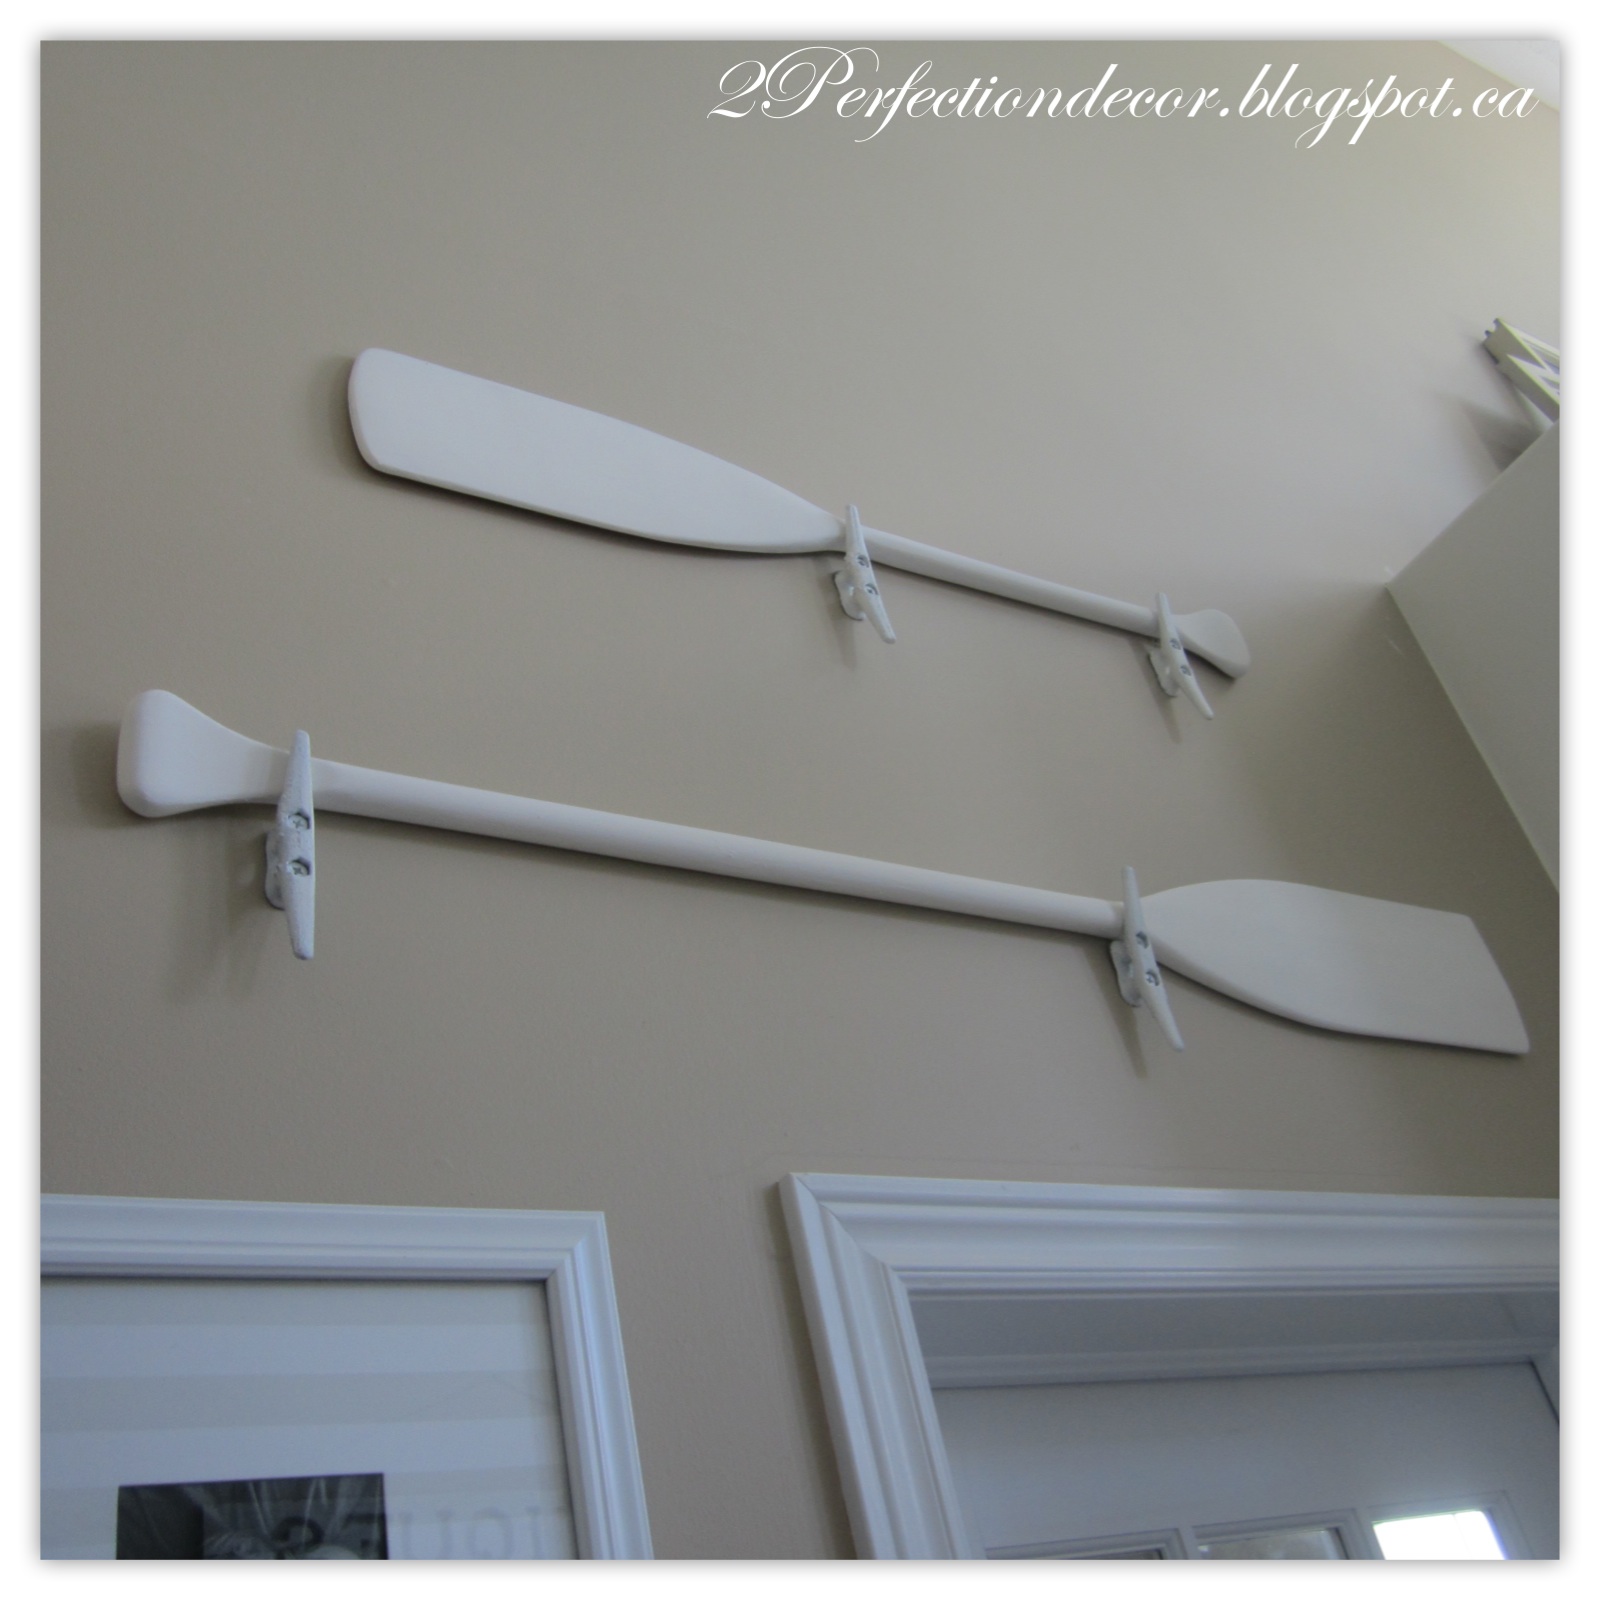 2Perfection Decor: Using oars as wall decor